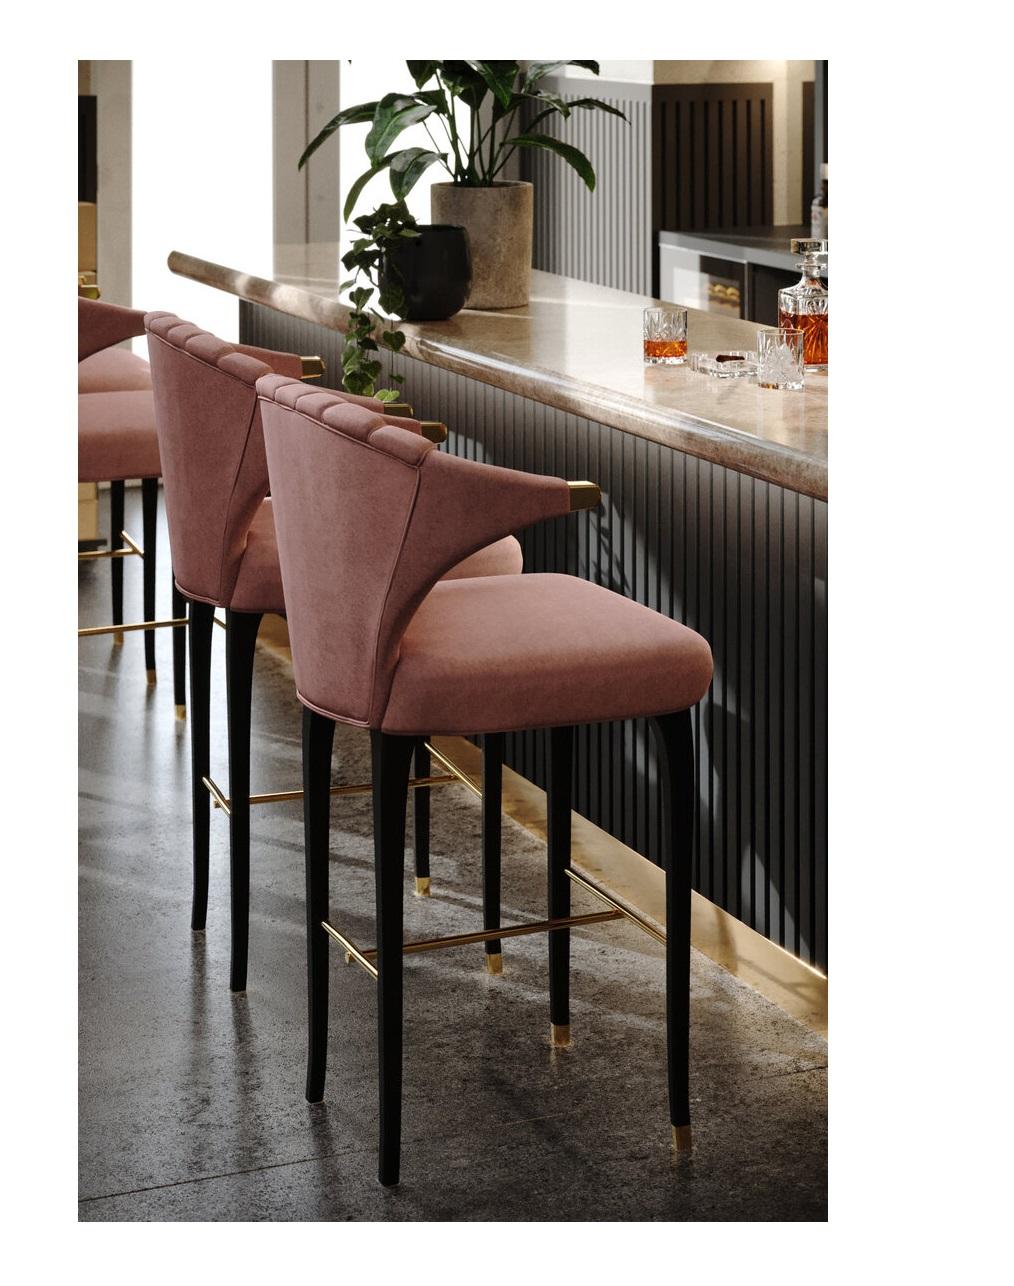 Contemporary elegant barstool upholstered in water repellent velvet. Constructed with lacquered wood frame and brass detailing on the arms and legs. 
Shown in ash rose velvet, dark lacquered wood and polished brass.
The stool is available in bar